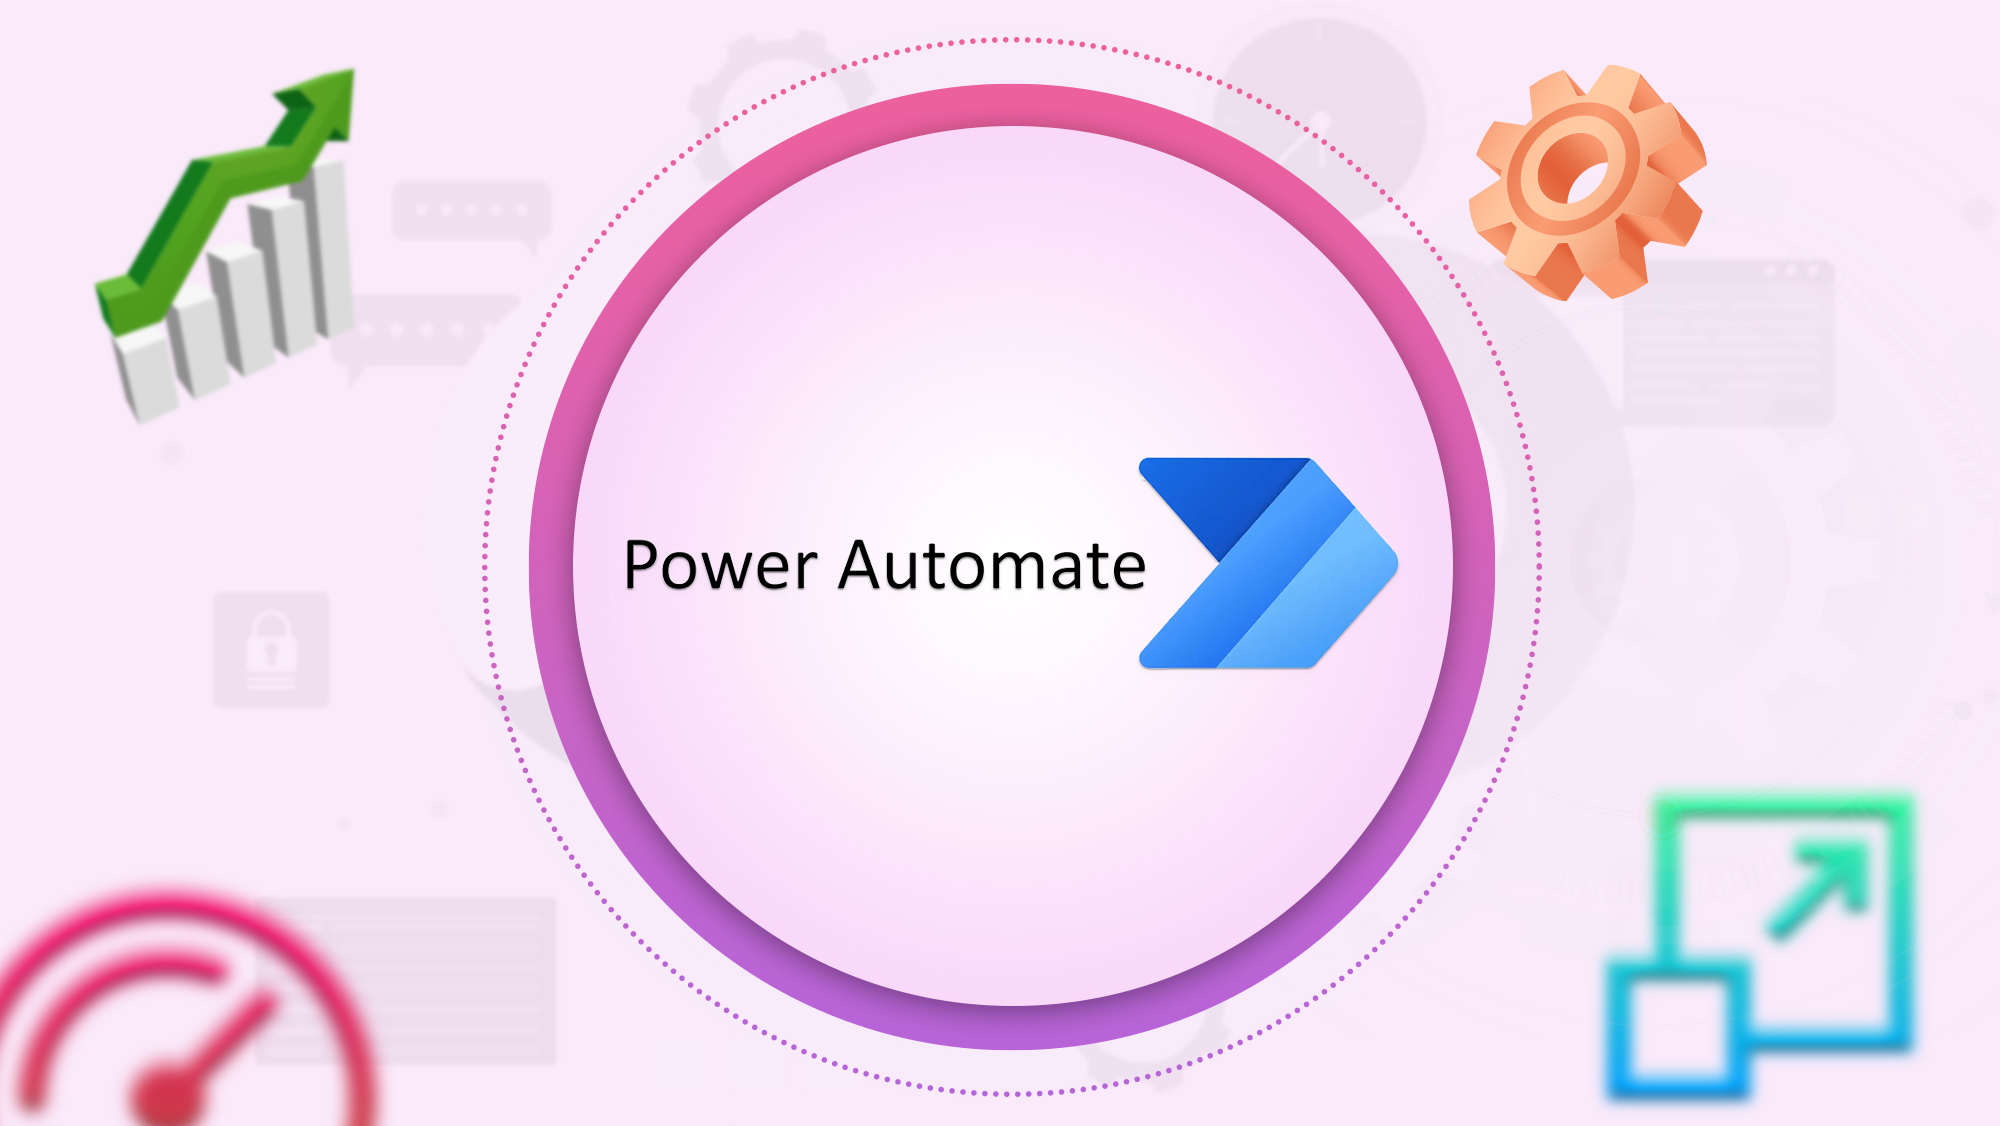 Power Automate: A Guide on Features & Benefits, Uses, Pricing